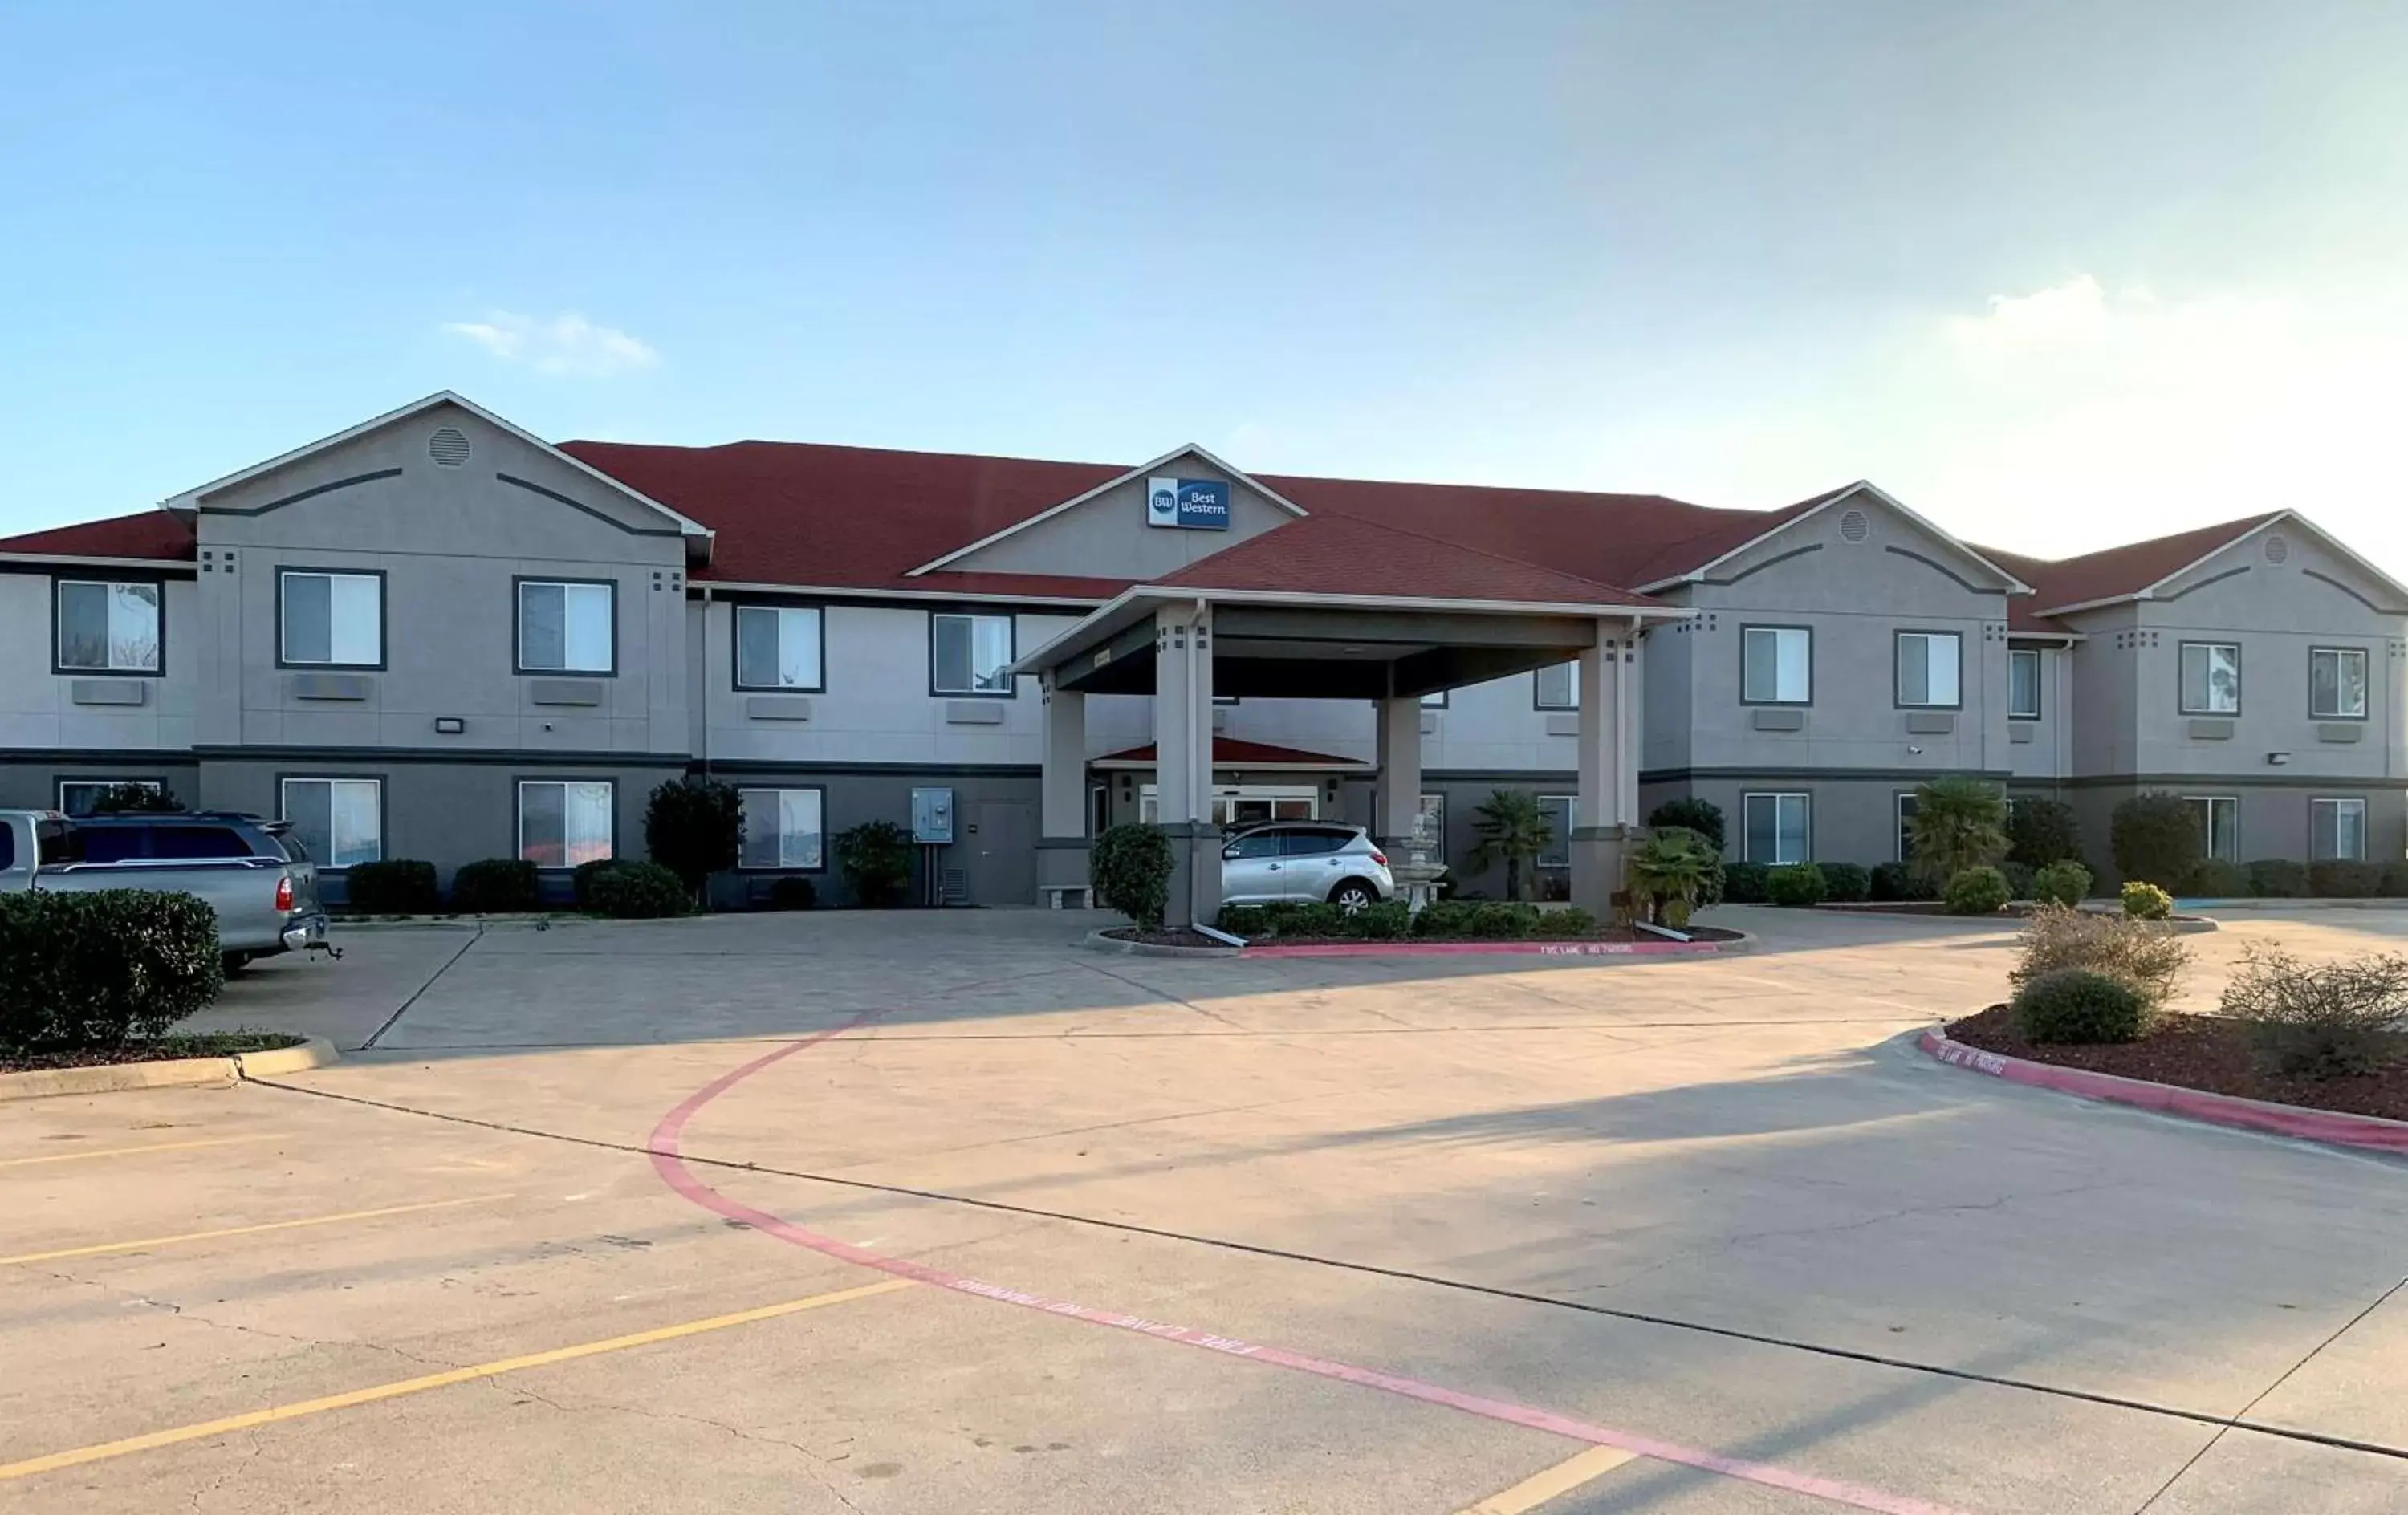 Property Building in Best Western Limestone Inn and Suites